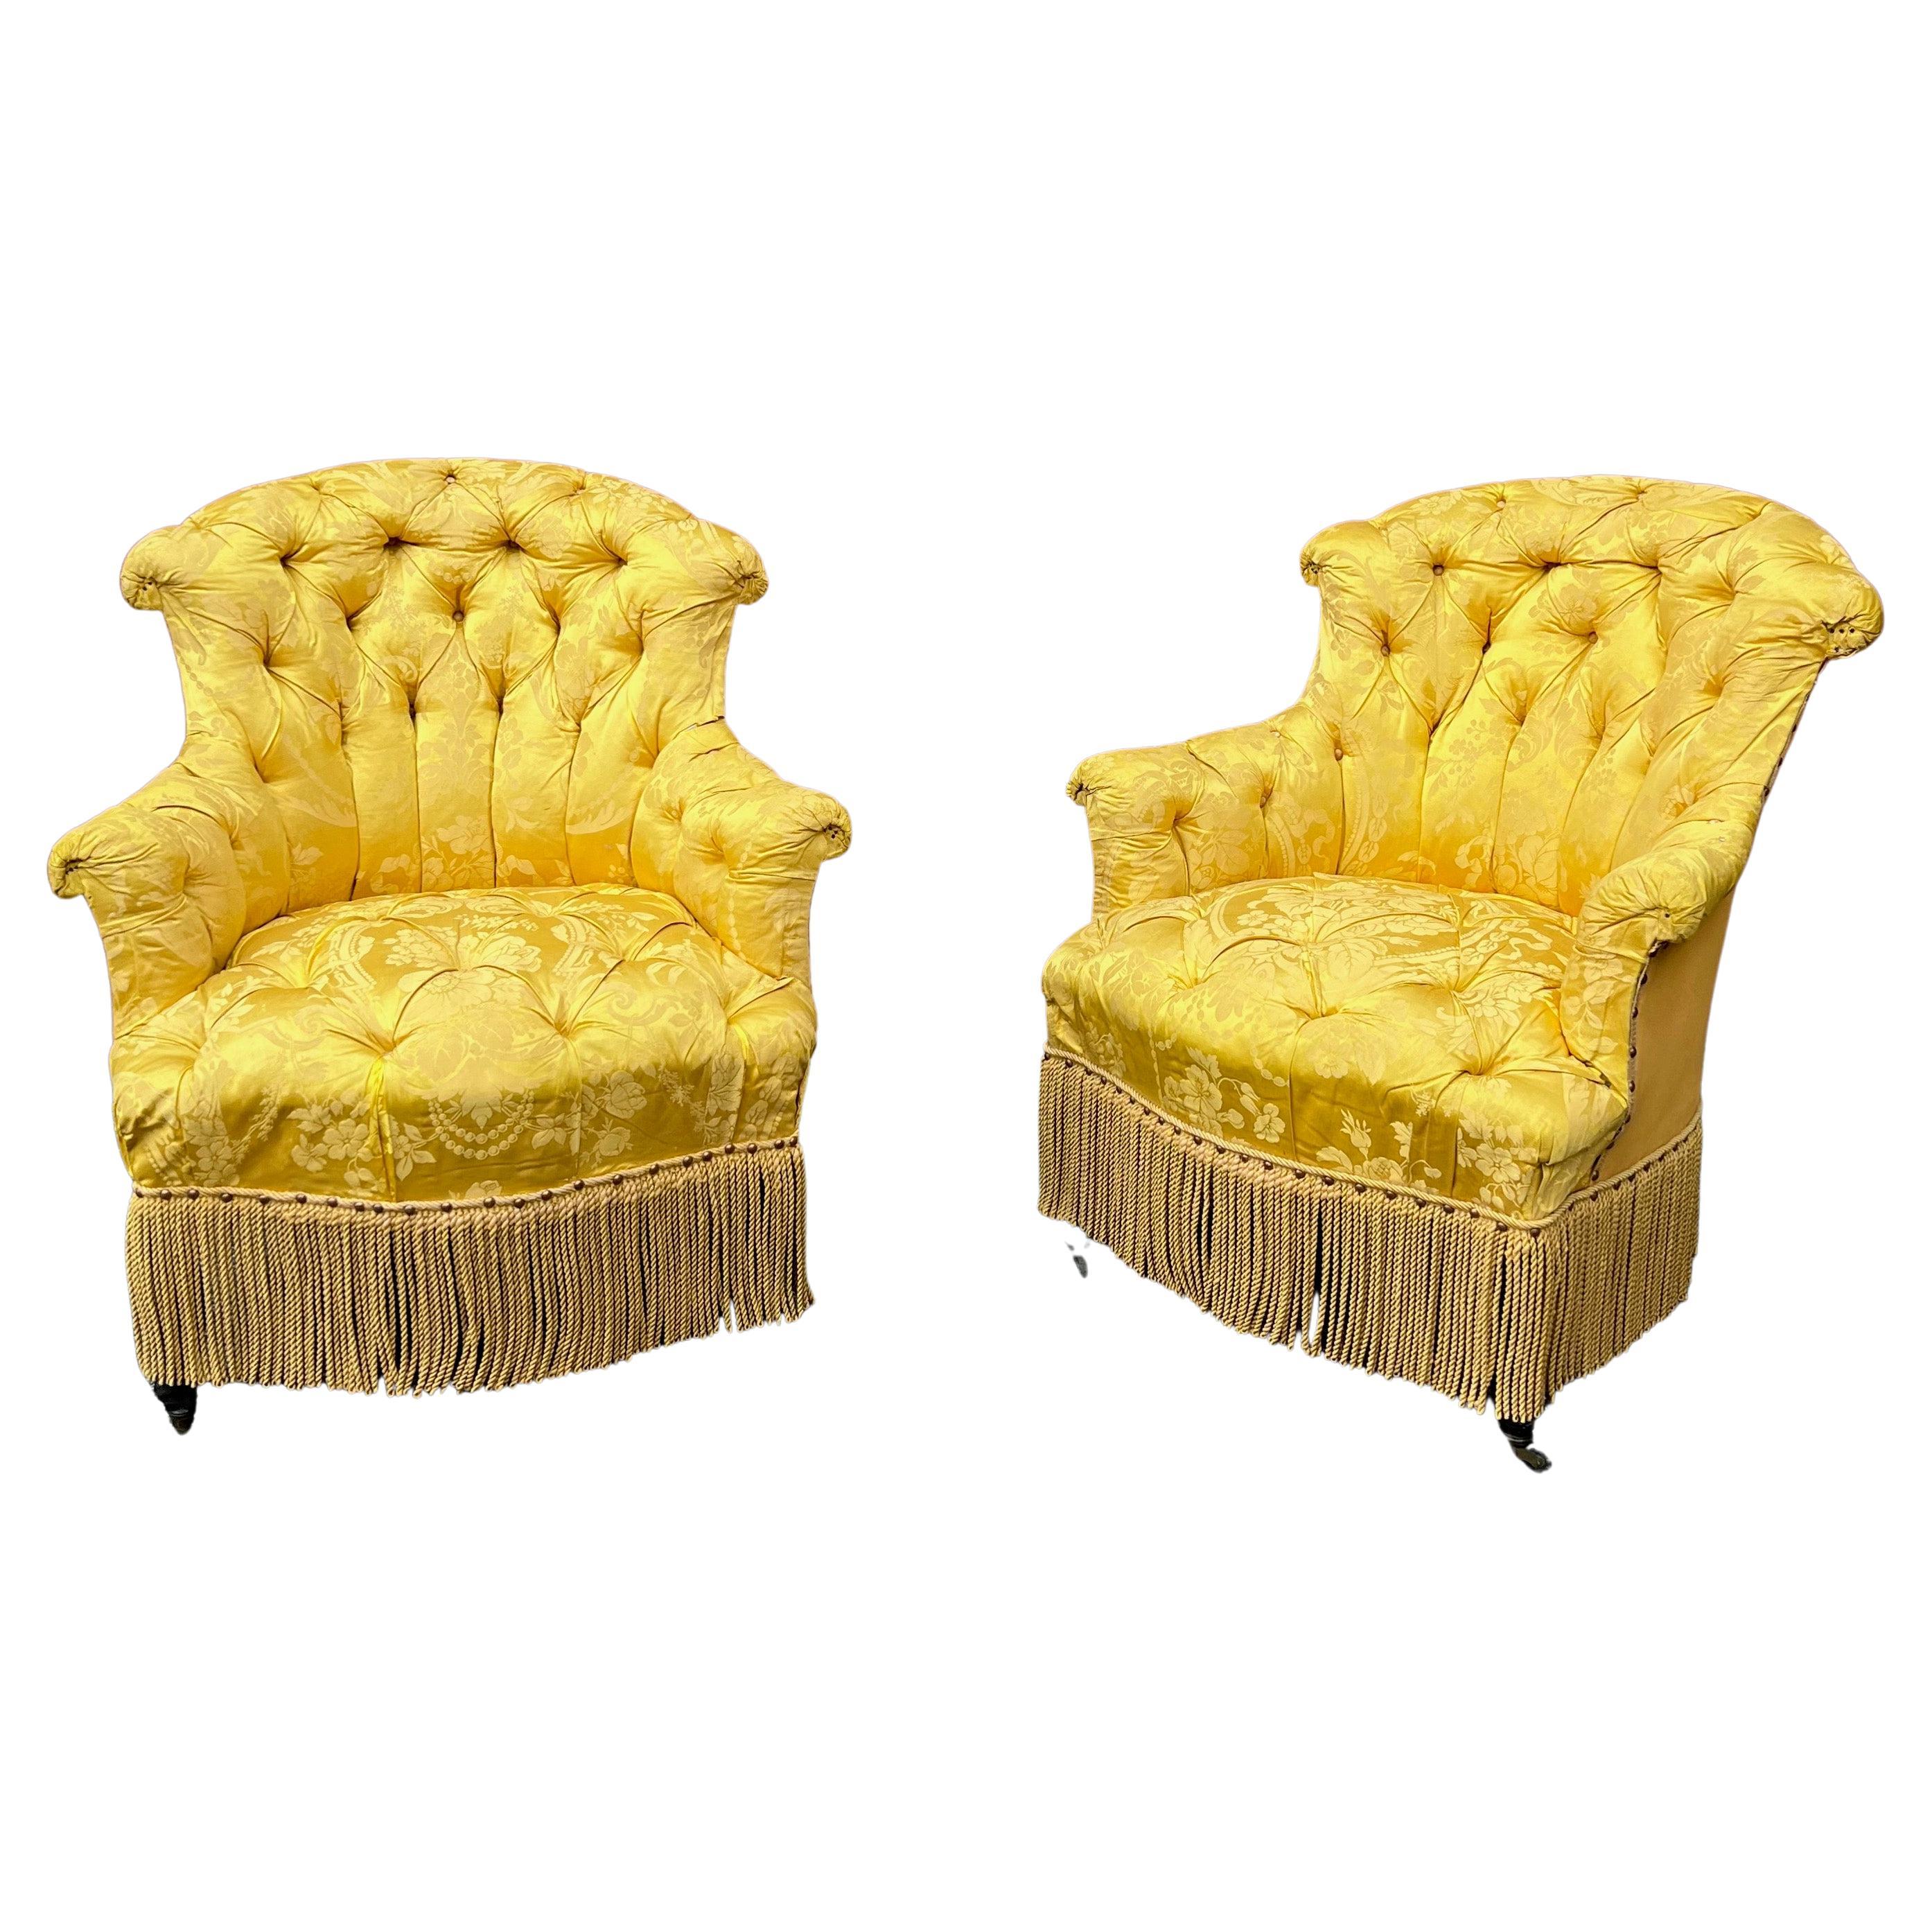 Pair of French Napoleon III Tufted Arm Chairs in Yellow Silk Fabric